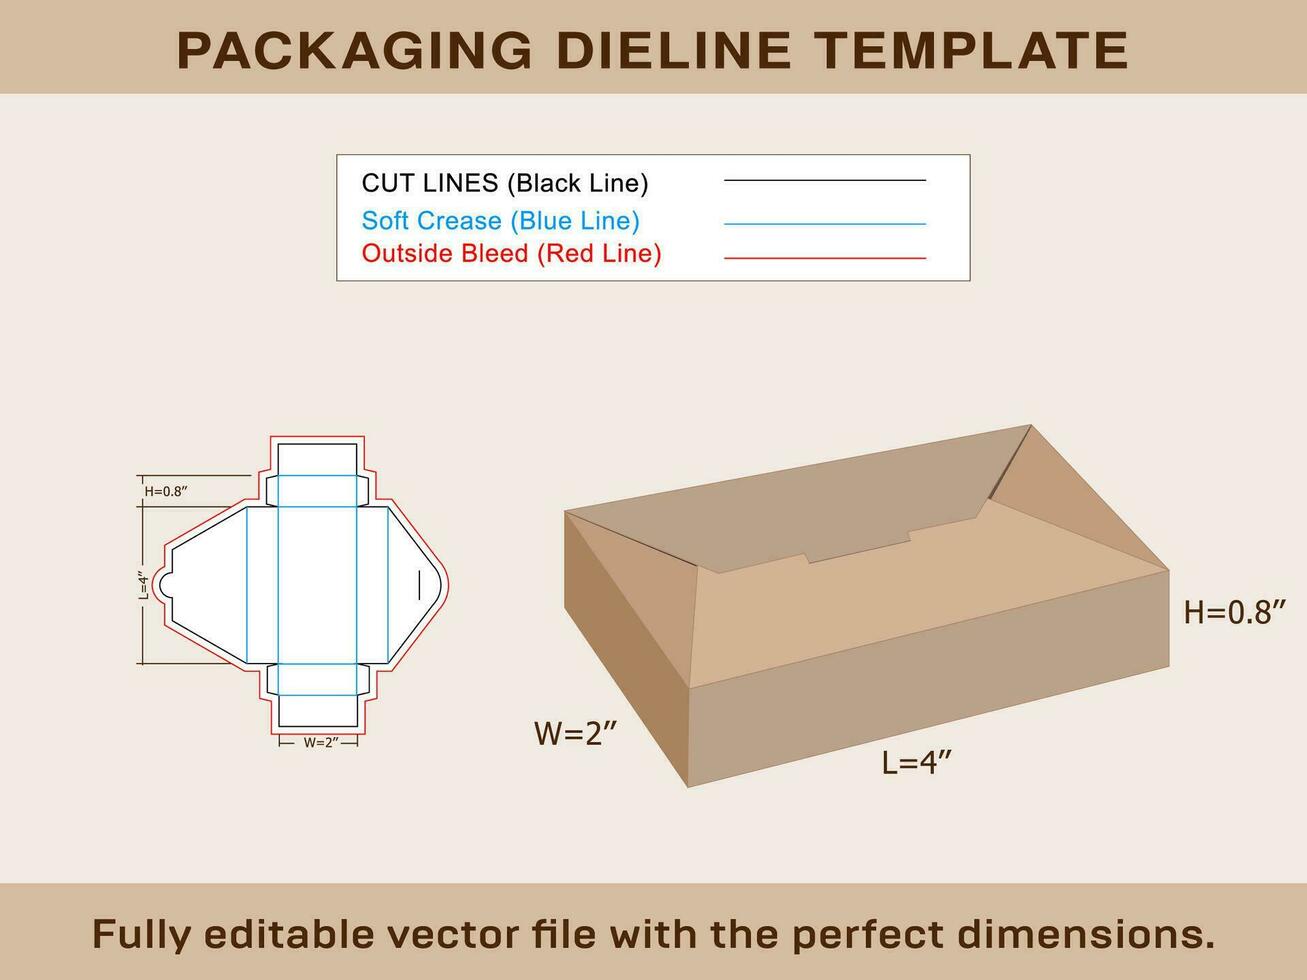 Rectangle Box, Storage Box, Packaging Box, Dieline Template vector